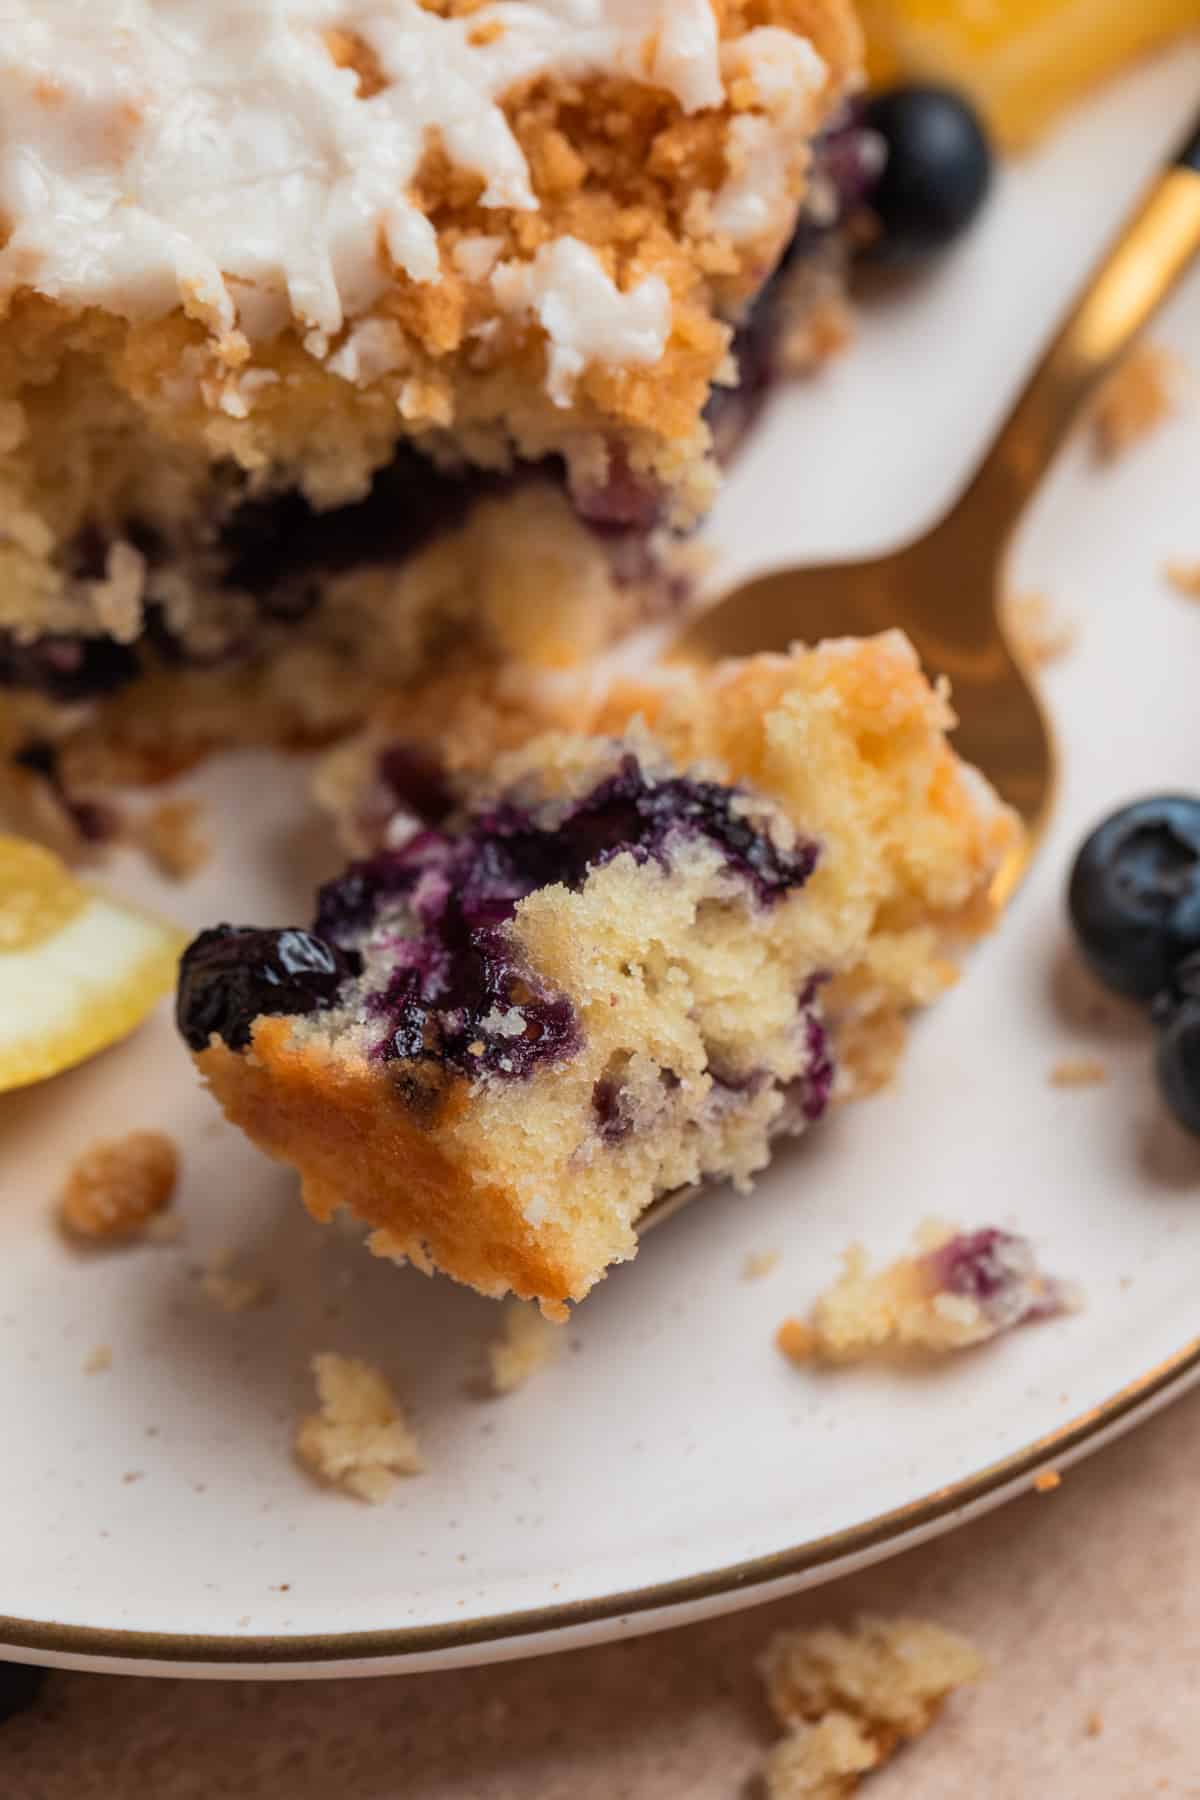 Forkful of lemon blueberry coffee cake on plate with slice of cake.